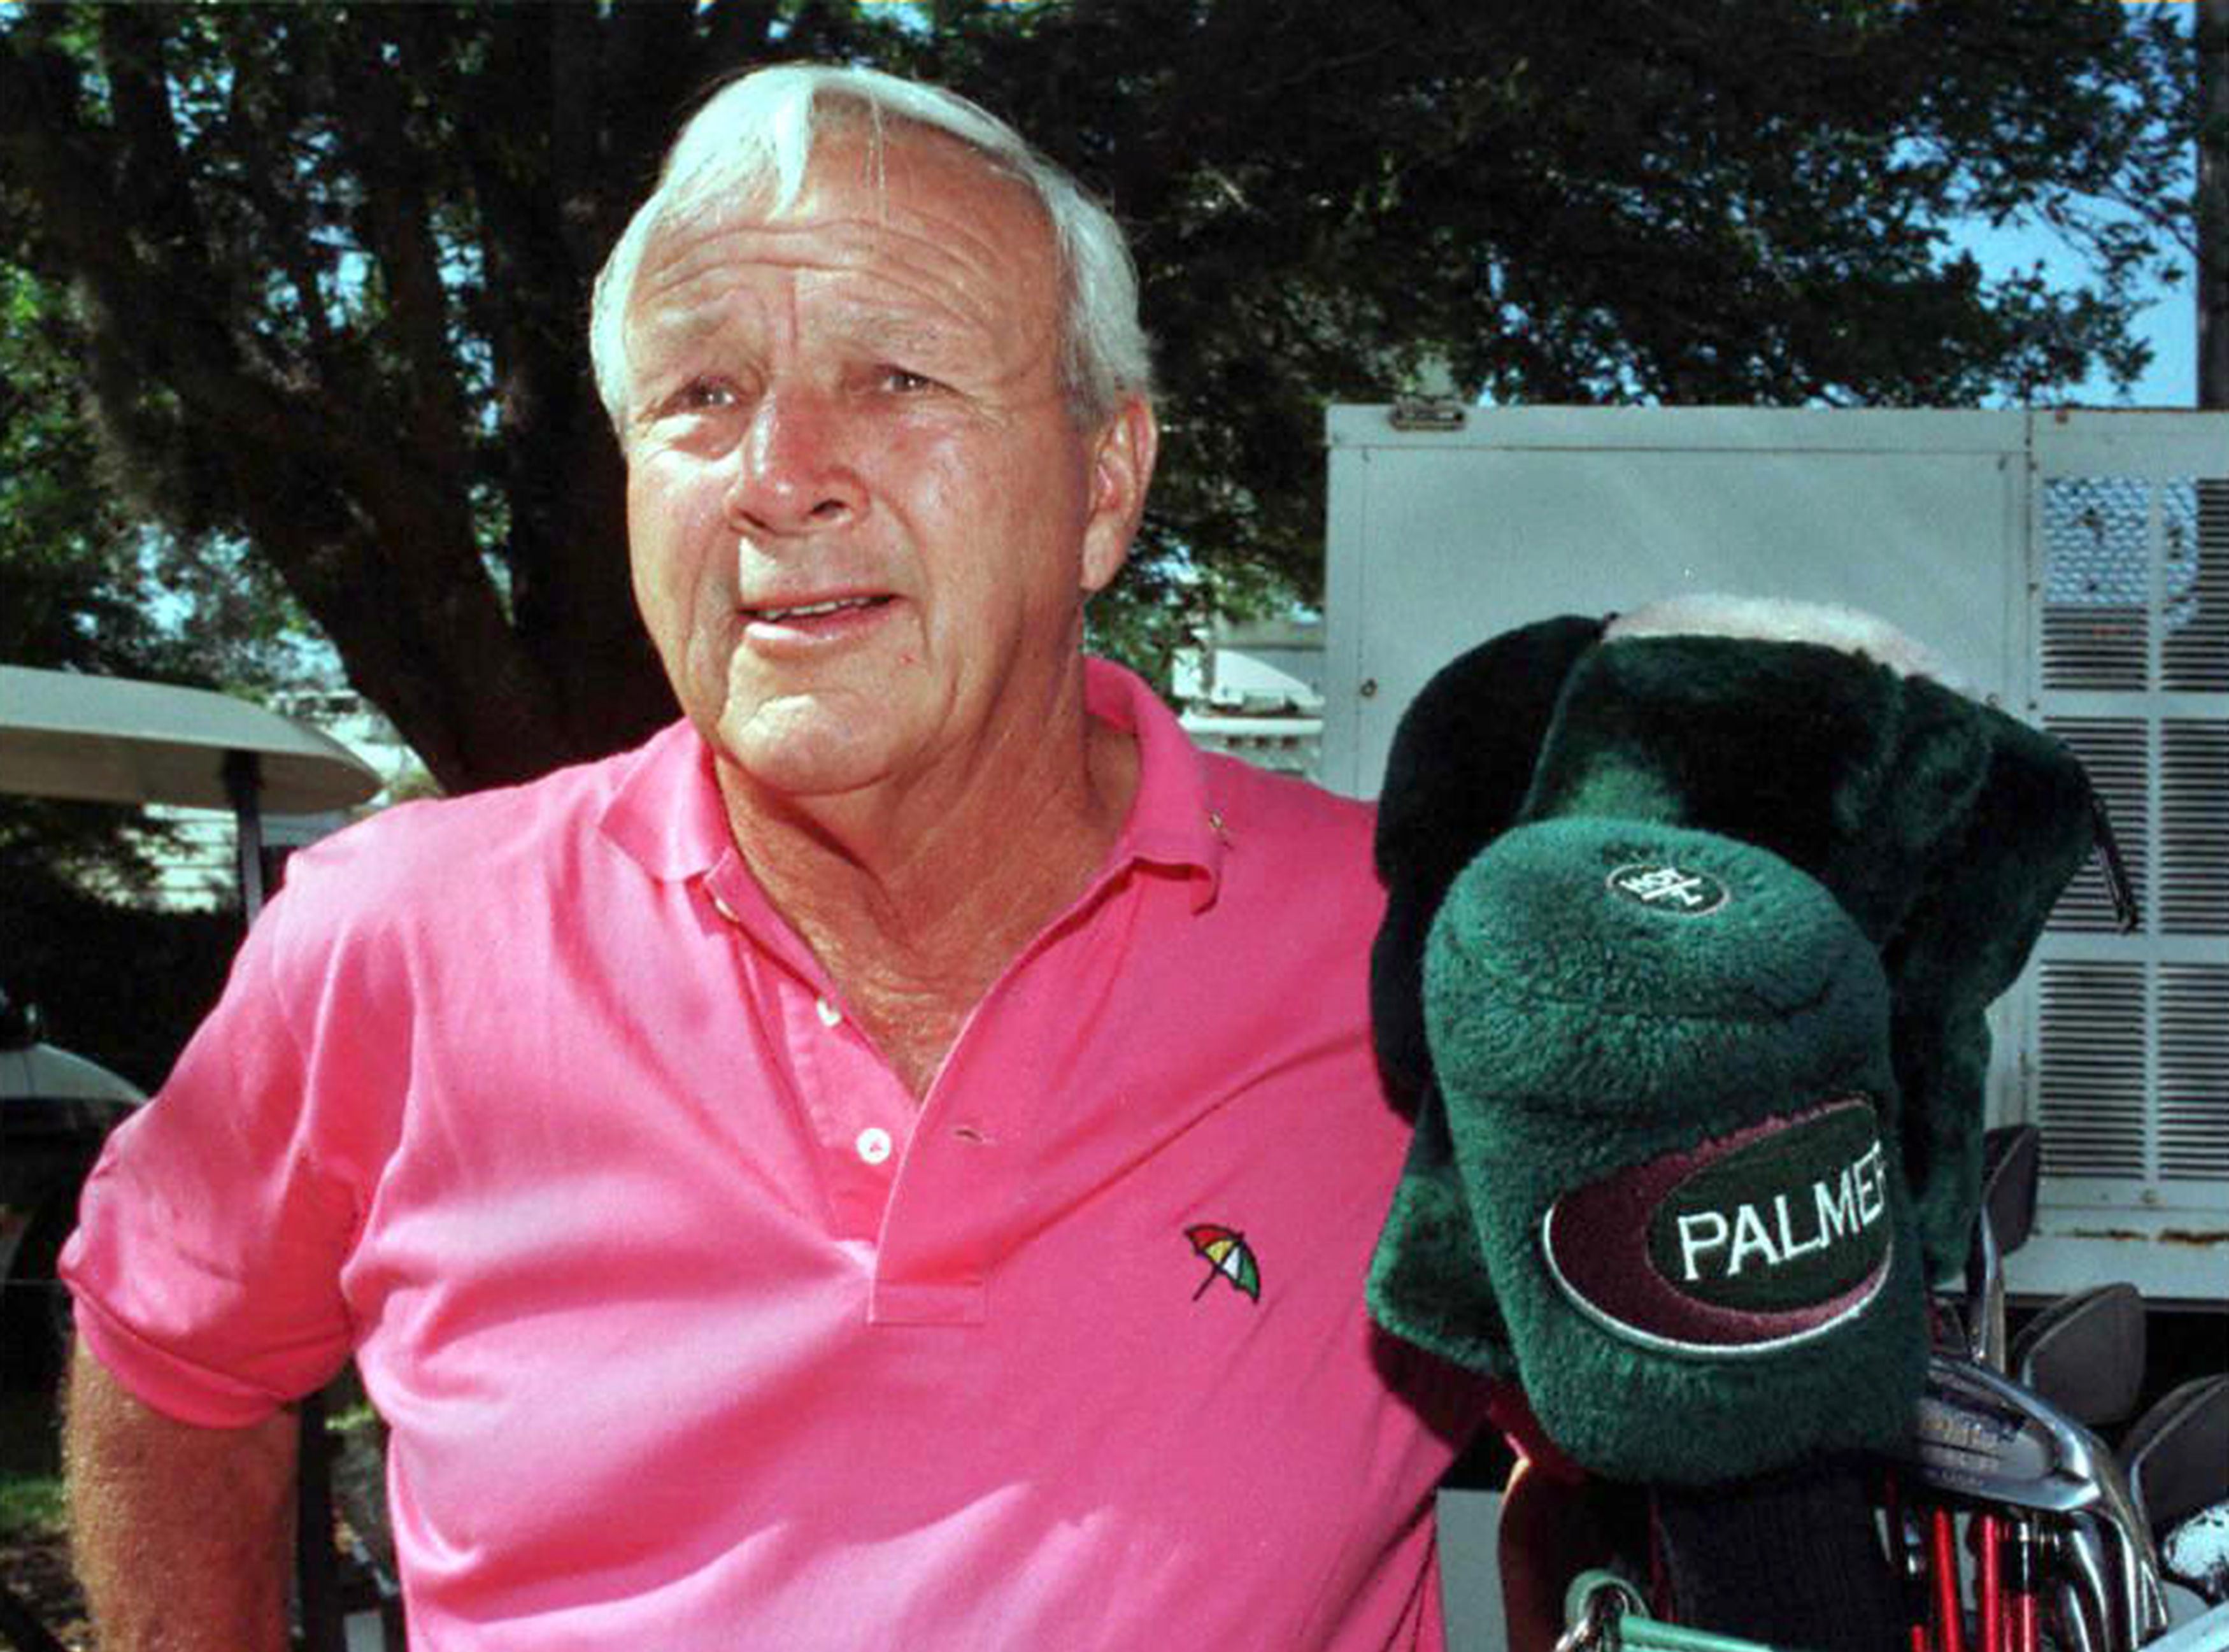 This file photo taken on March 11, 1997 shows golf great Arnold Palmer before a press conference at the Bay Hill Club in Orlando, Fla. (Carlo Allegri/AFP/Getty Images)